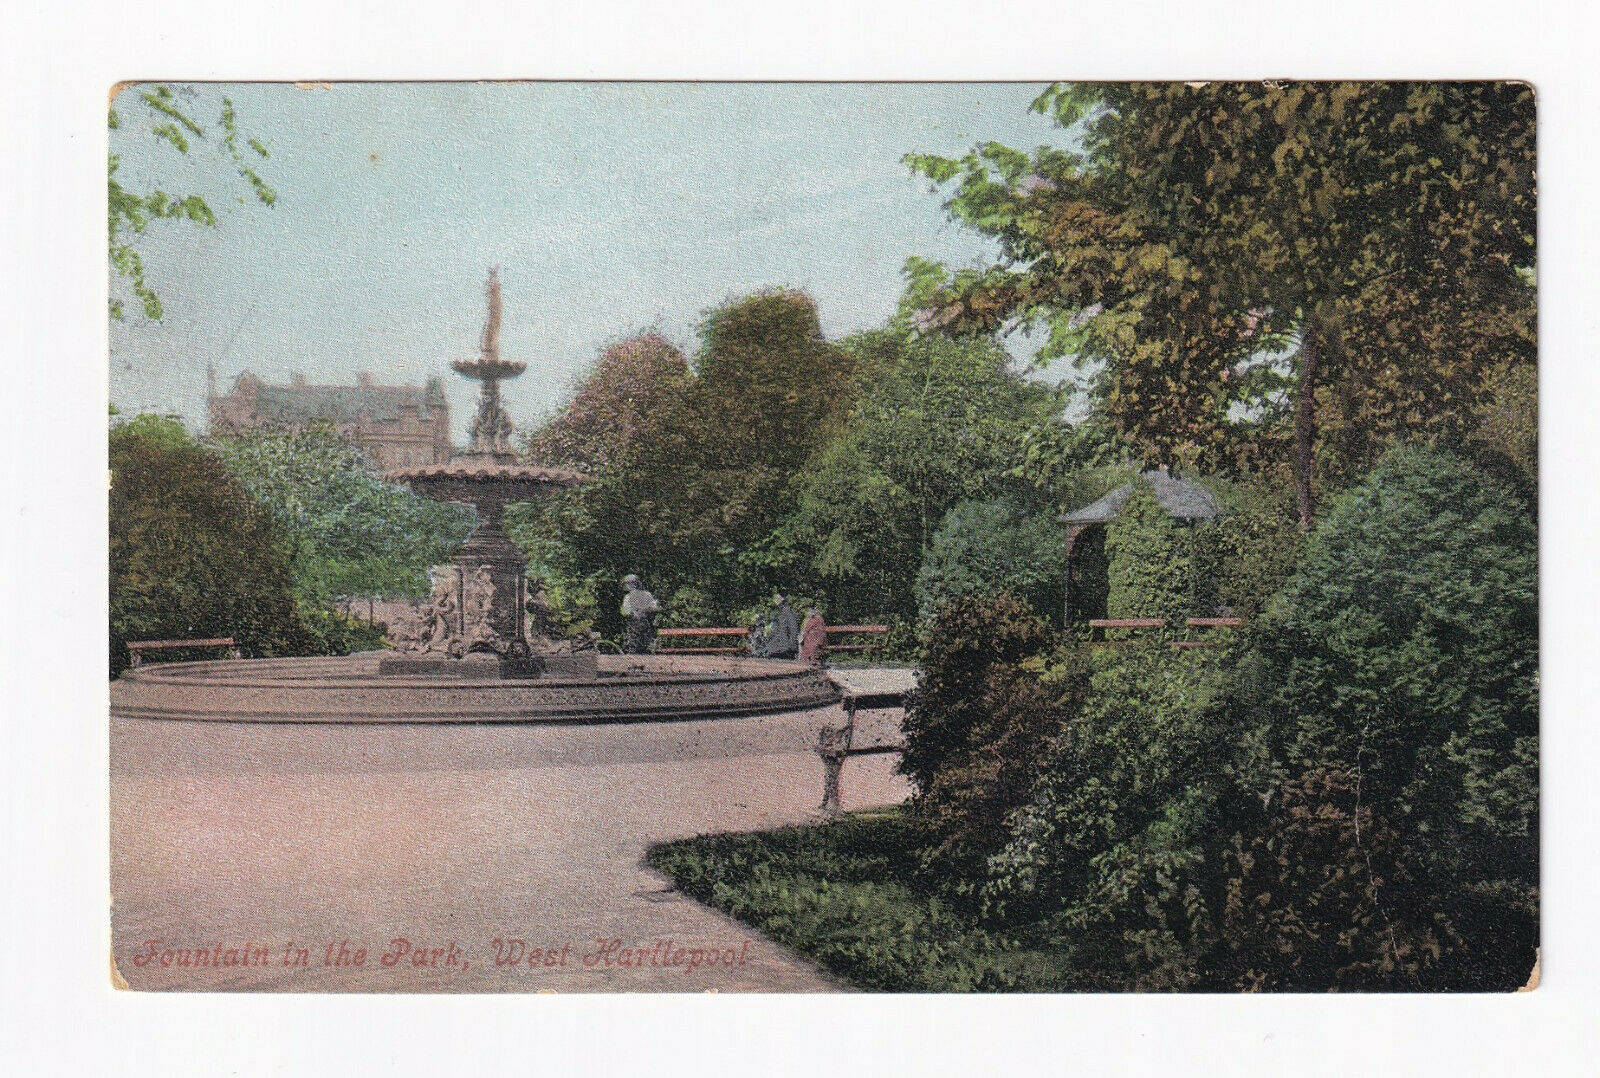 House Clearance - Printed Service, Fountain in the Park, West Hartlepool